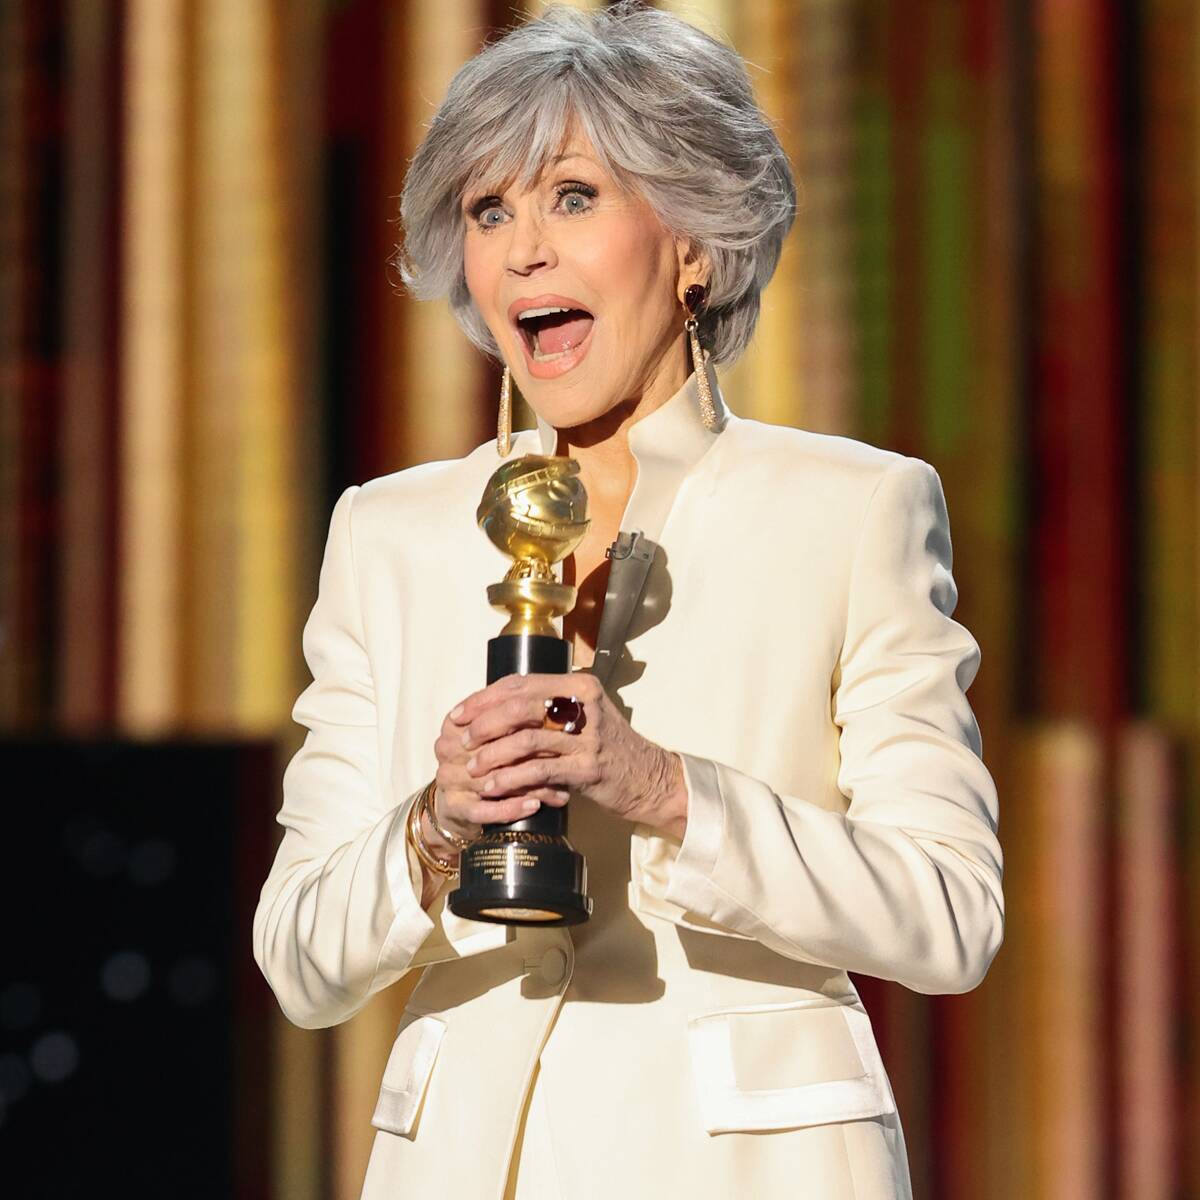 Jane Fonda Calls on Hollywood to Be "Leaders" of Diversity at the 2021 Golden Globes